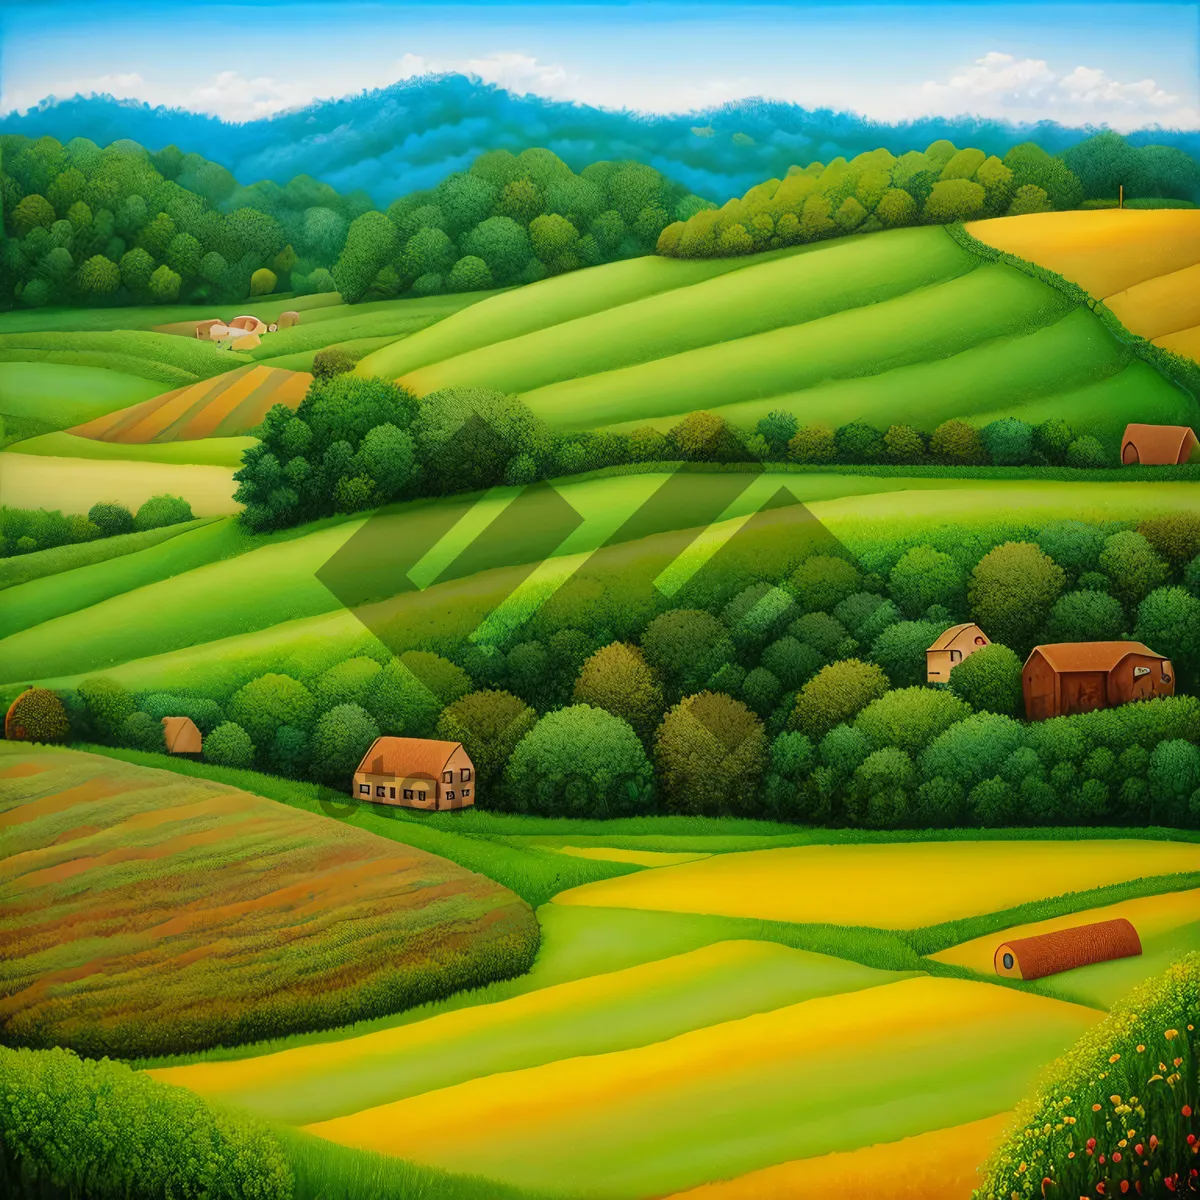 Picture of Serene Summer Fields: A Picturesque Rural Landscape